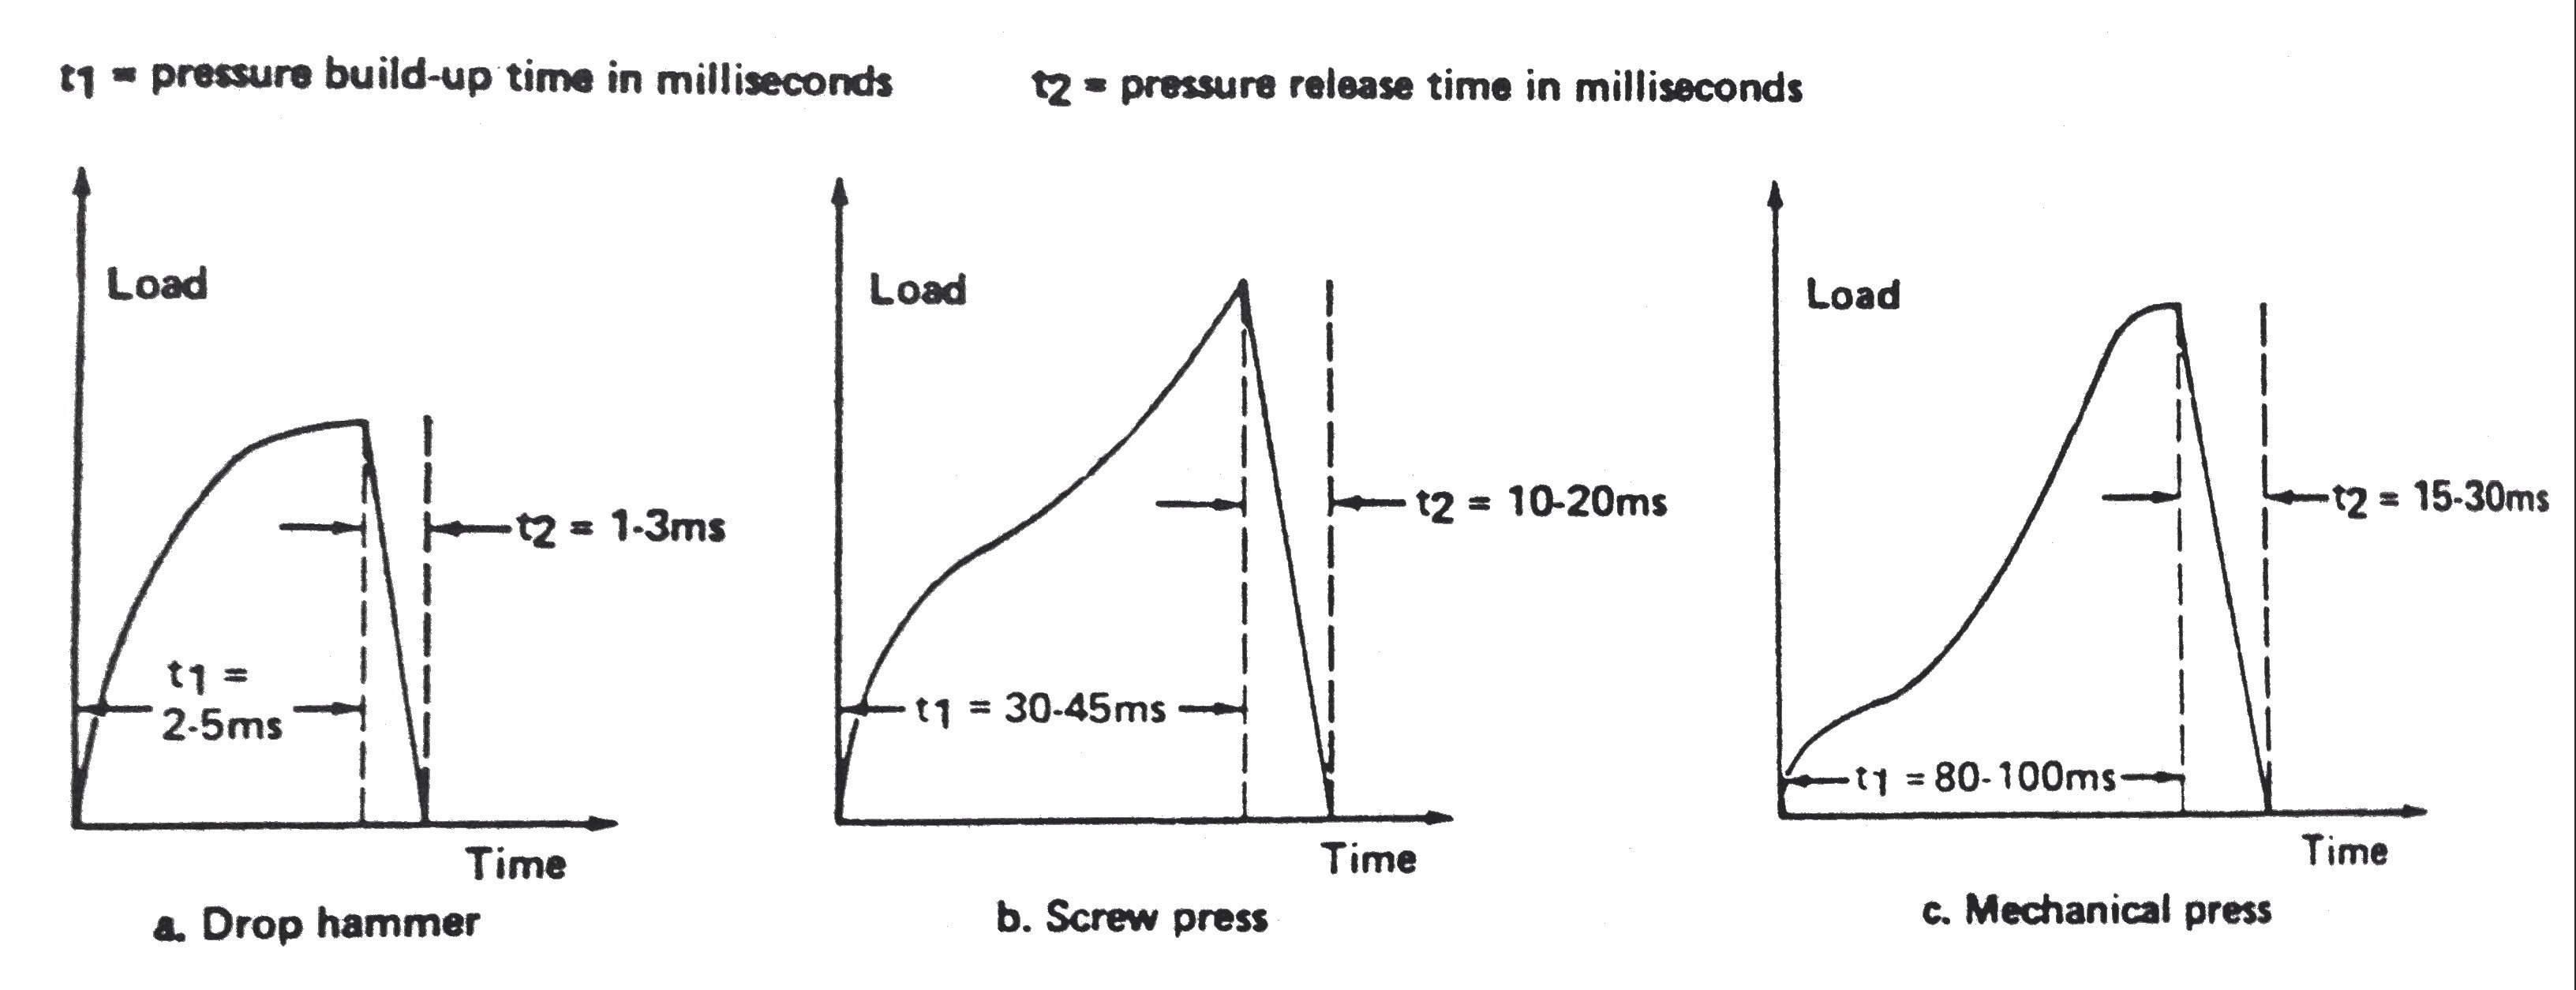 Pressure Build-up Time of Drop Hammer, Screw Press and Mechanical Press